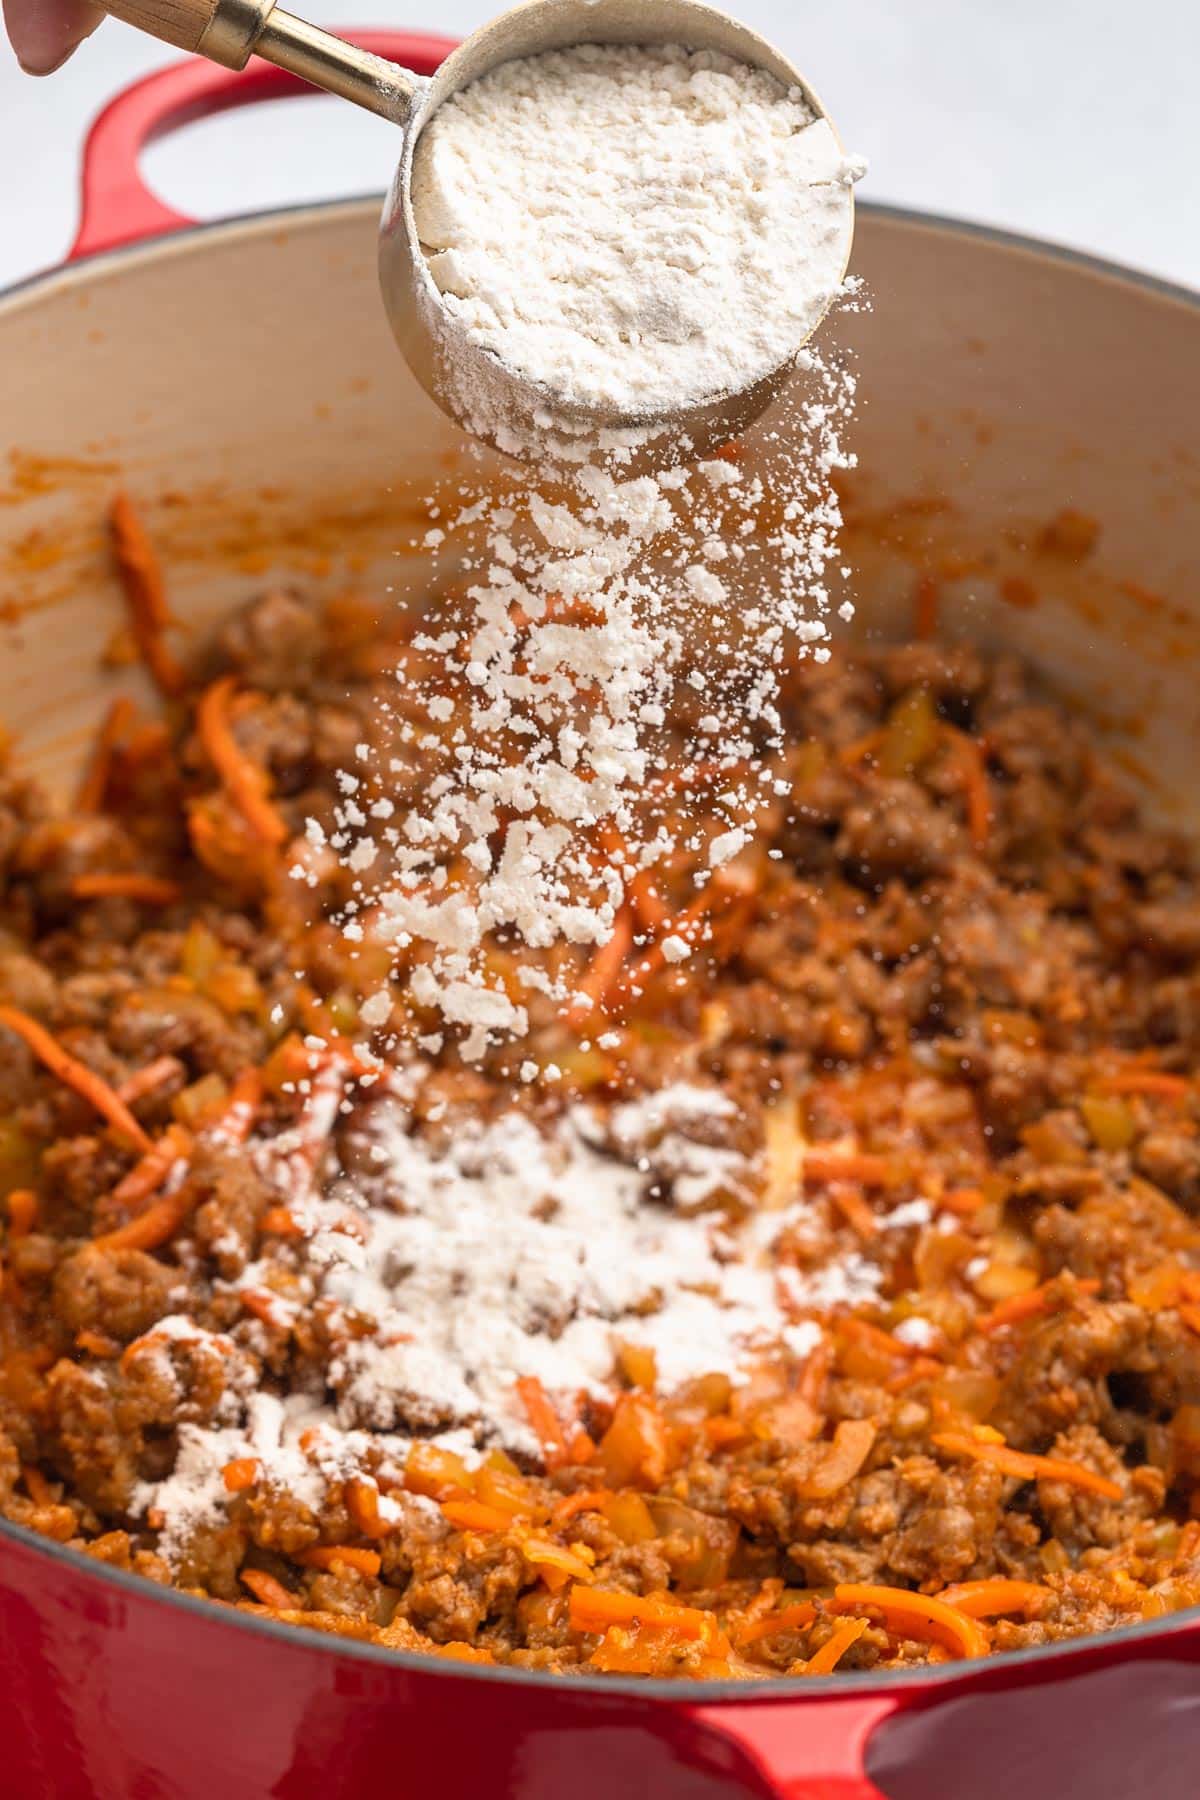 flour being sprinkled into brown sausage and sauteed aromatics in a red enameled cast iron Dutch oven